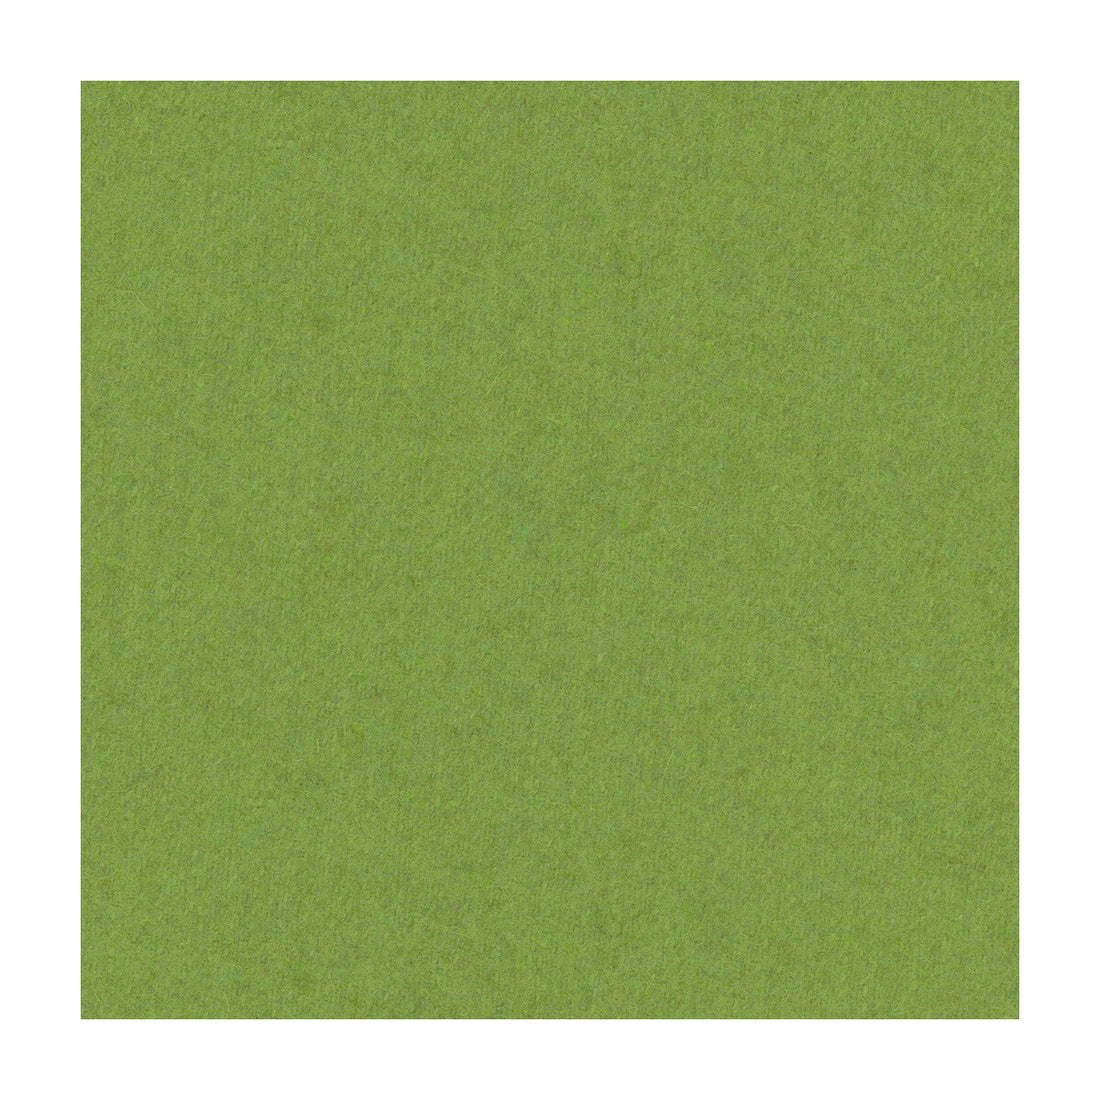 Jefferson Wool fabric in sprout color - pattern 34397.3.0 - by Kravet Contract